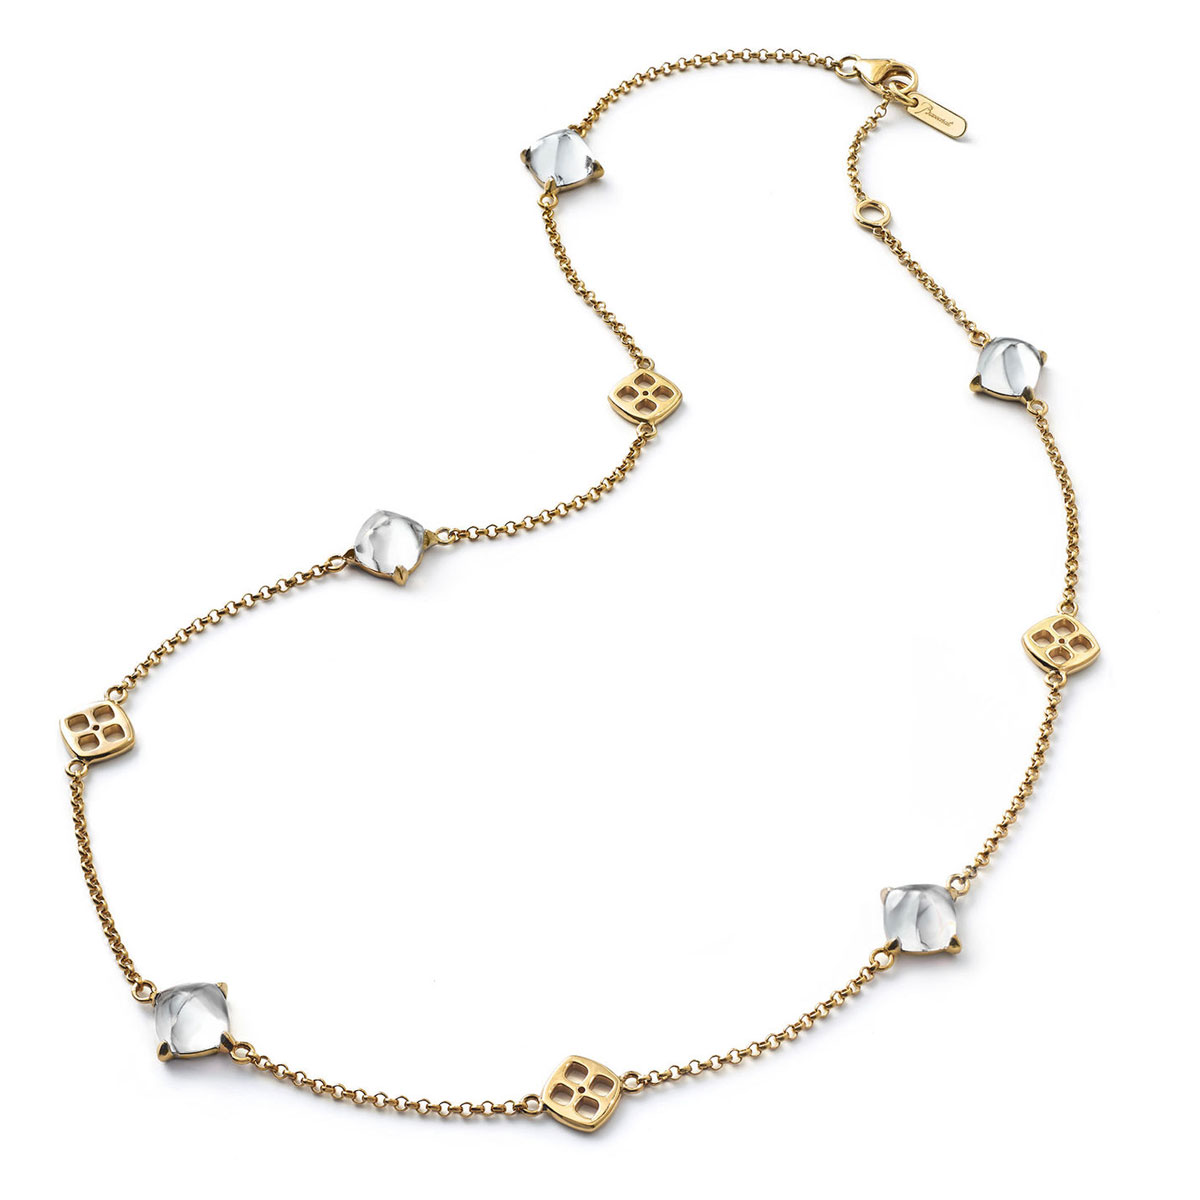 Baccarat Crystal Medicis Mini Necklace Vermeil Gold Clear